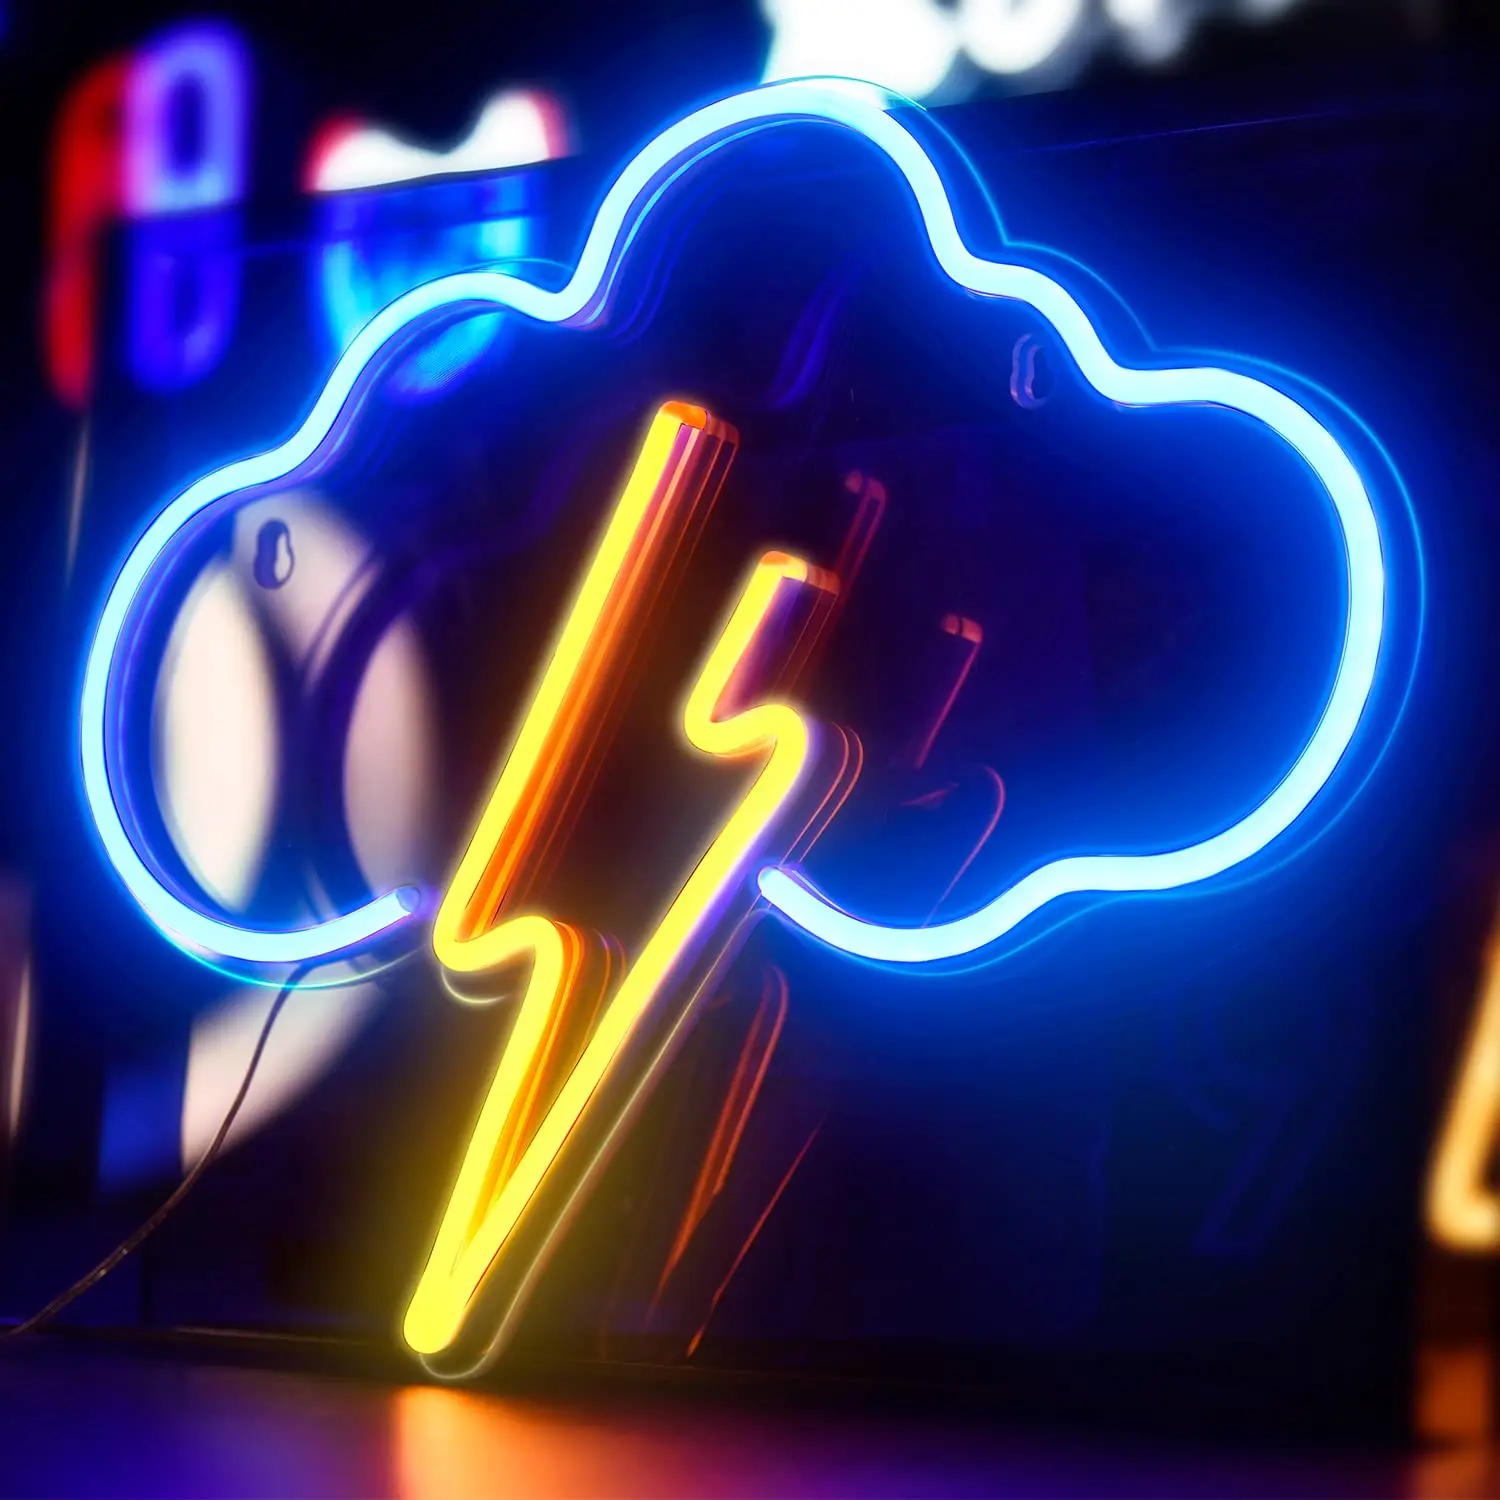 

Neon Sign Cloud Led Neon Light Wall Decor Battery or USB Powered Light Up Acrylic Neon Signs for Bedroom Kids Room Party Wedding